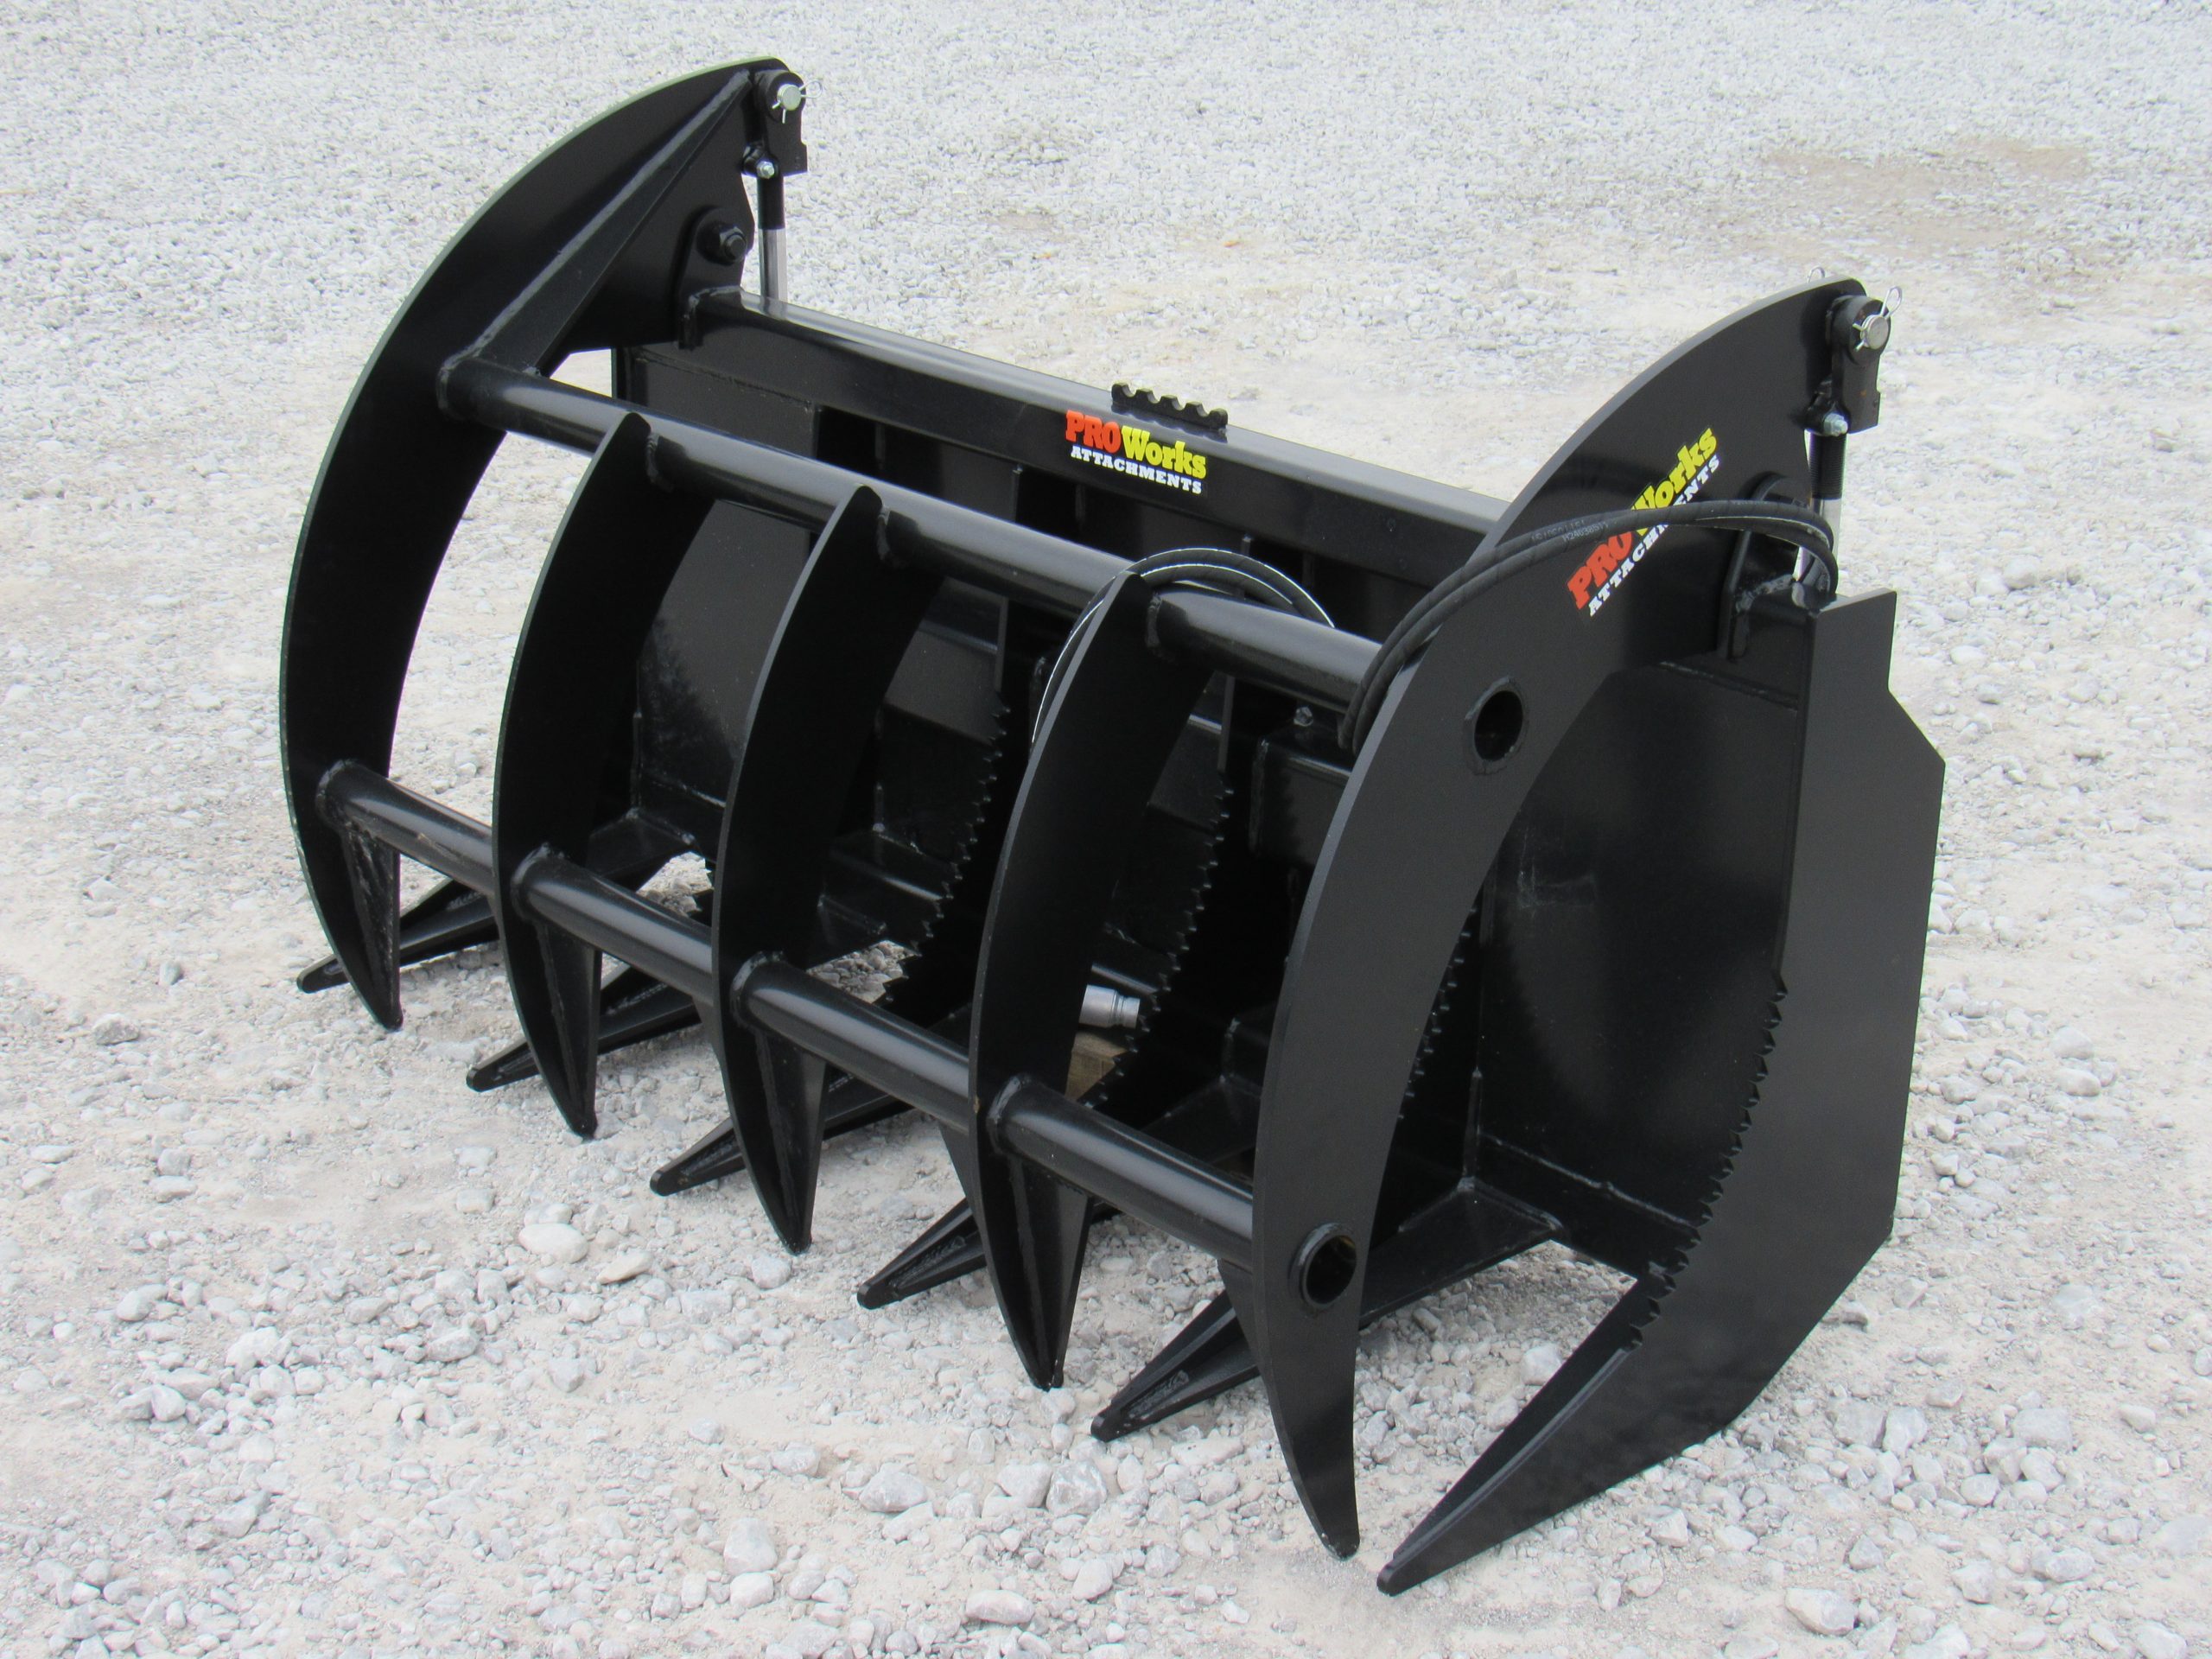 New 66" Brush Grapple Skid Steer Attachment *FREE SHIPPING*